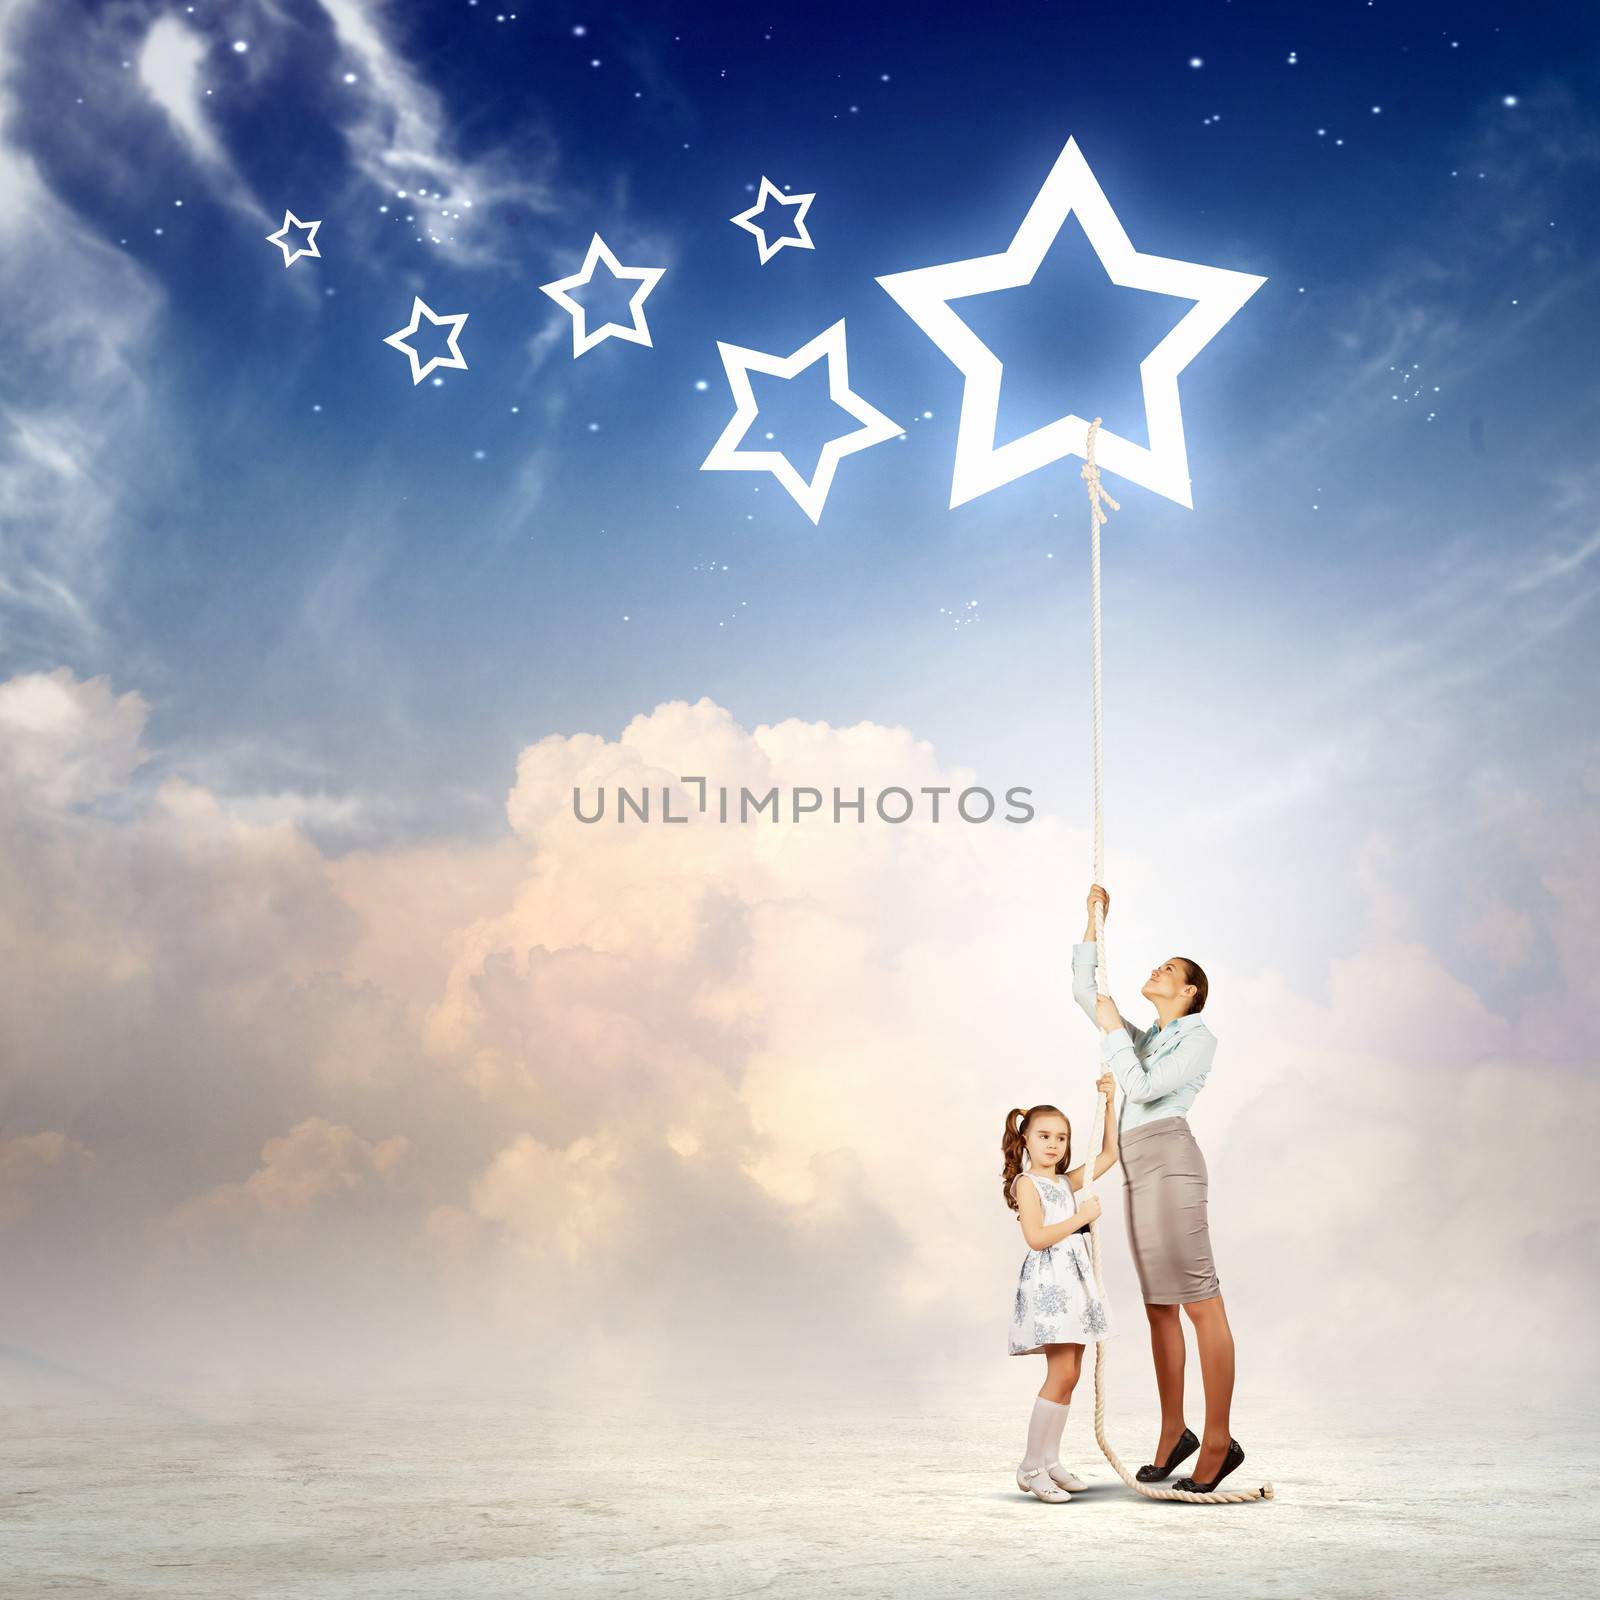 Family pulling rope with a star symbol by sergey_nivens